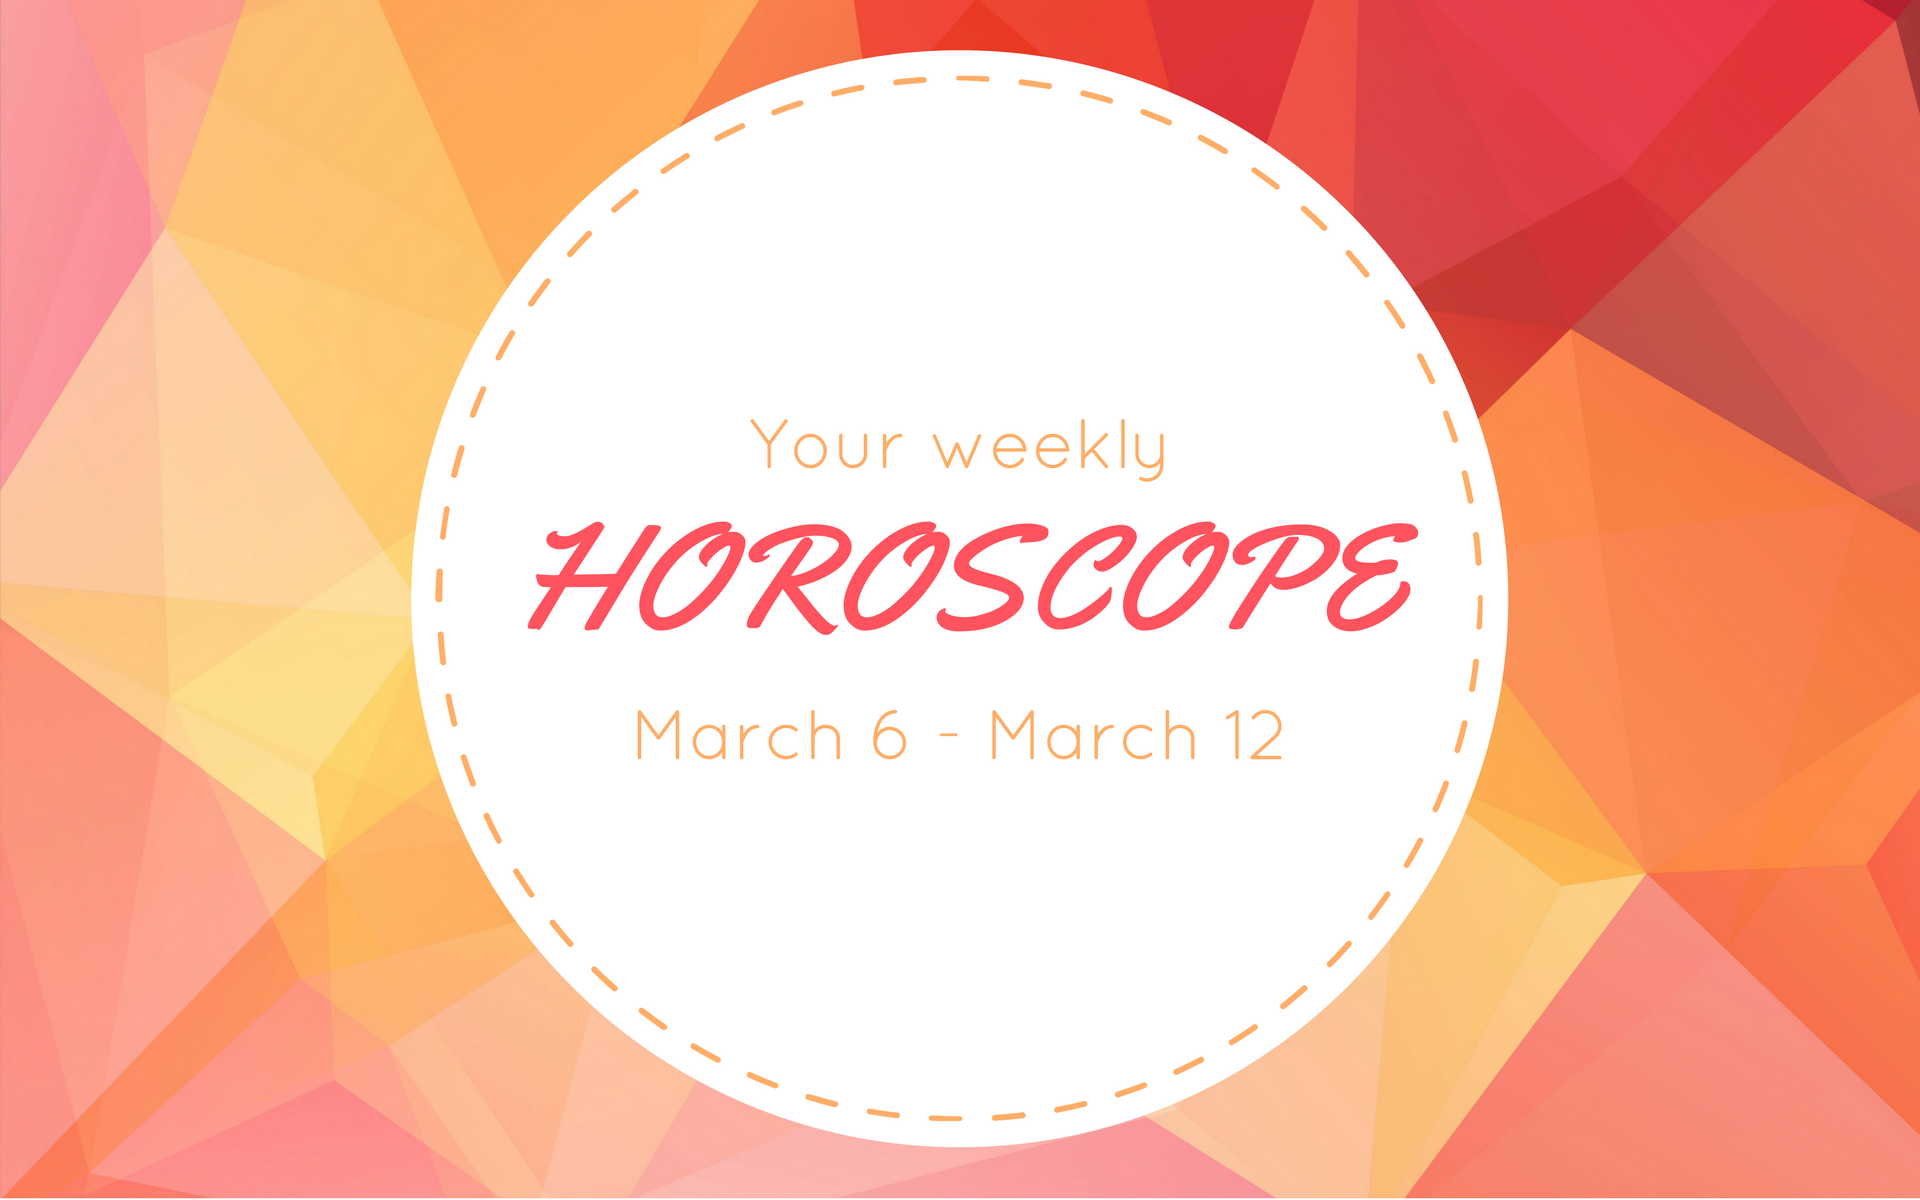 Your Weekly Horoscope: March 6 - March 12